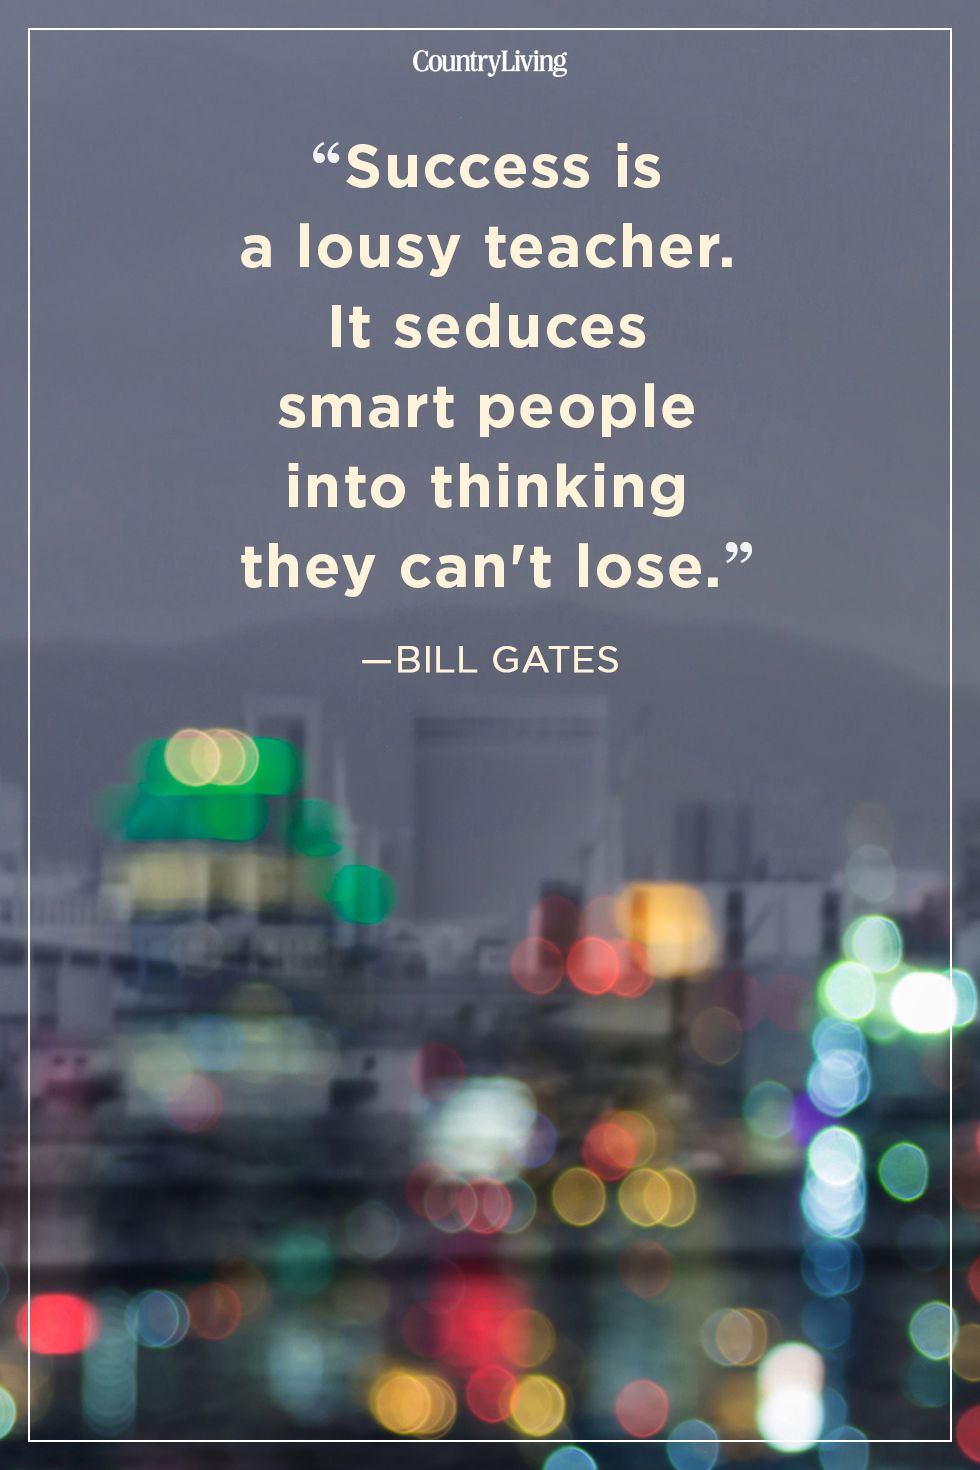 success is a lousy teacher. it seduces smart people into thinking they can’t lose. bill gates